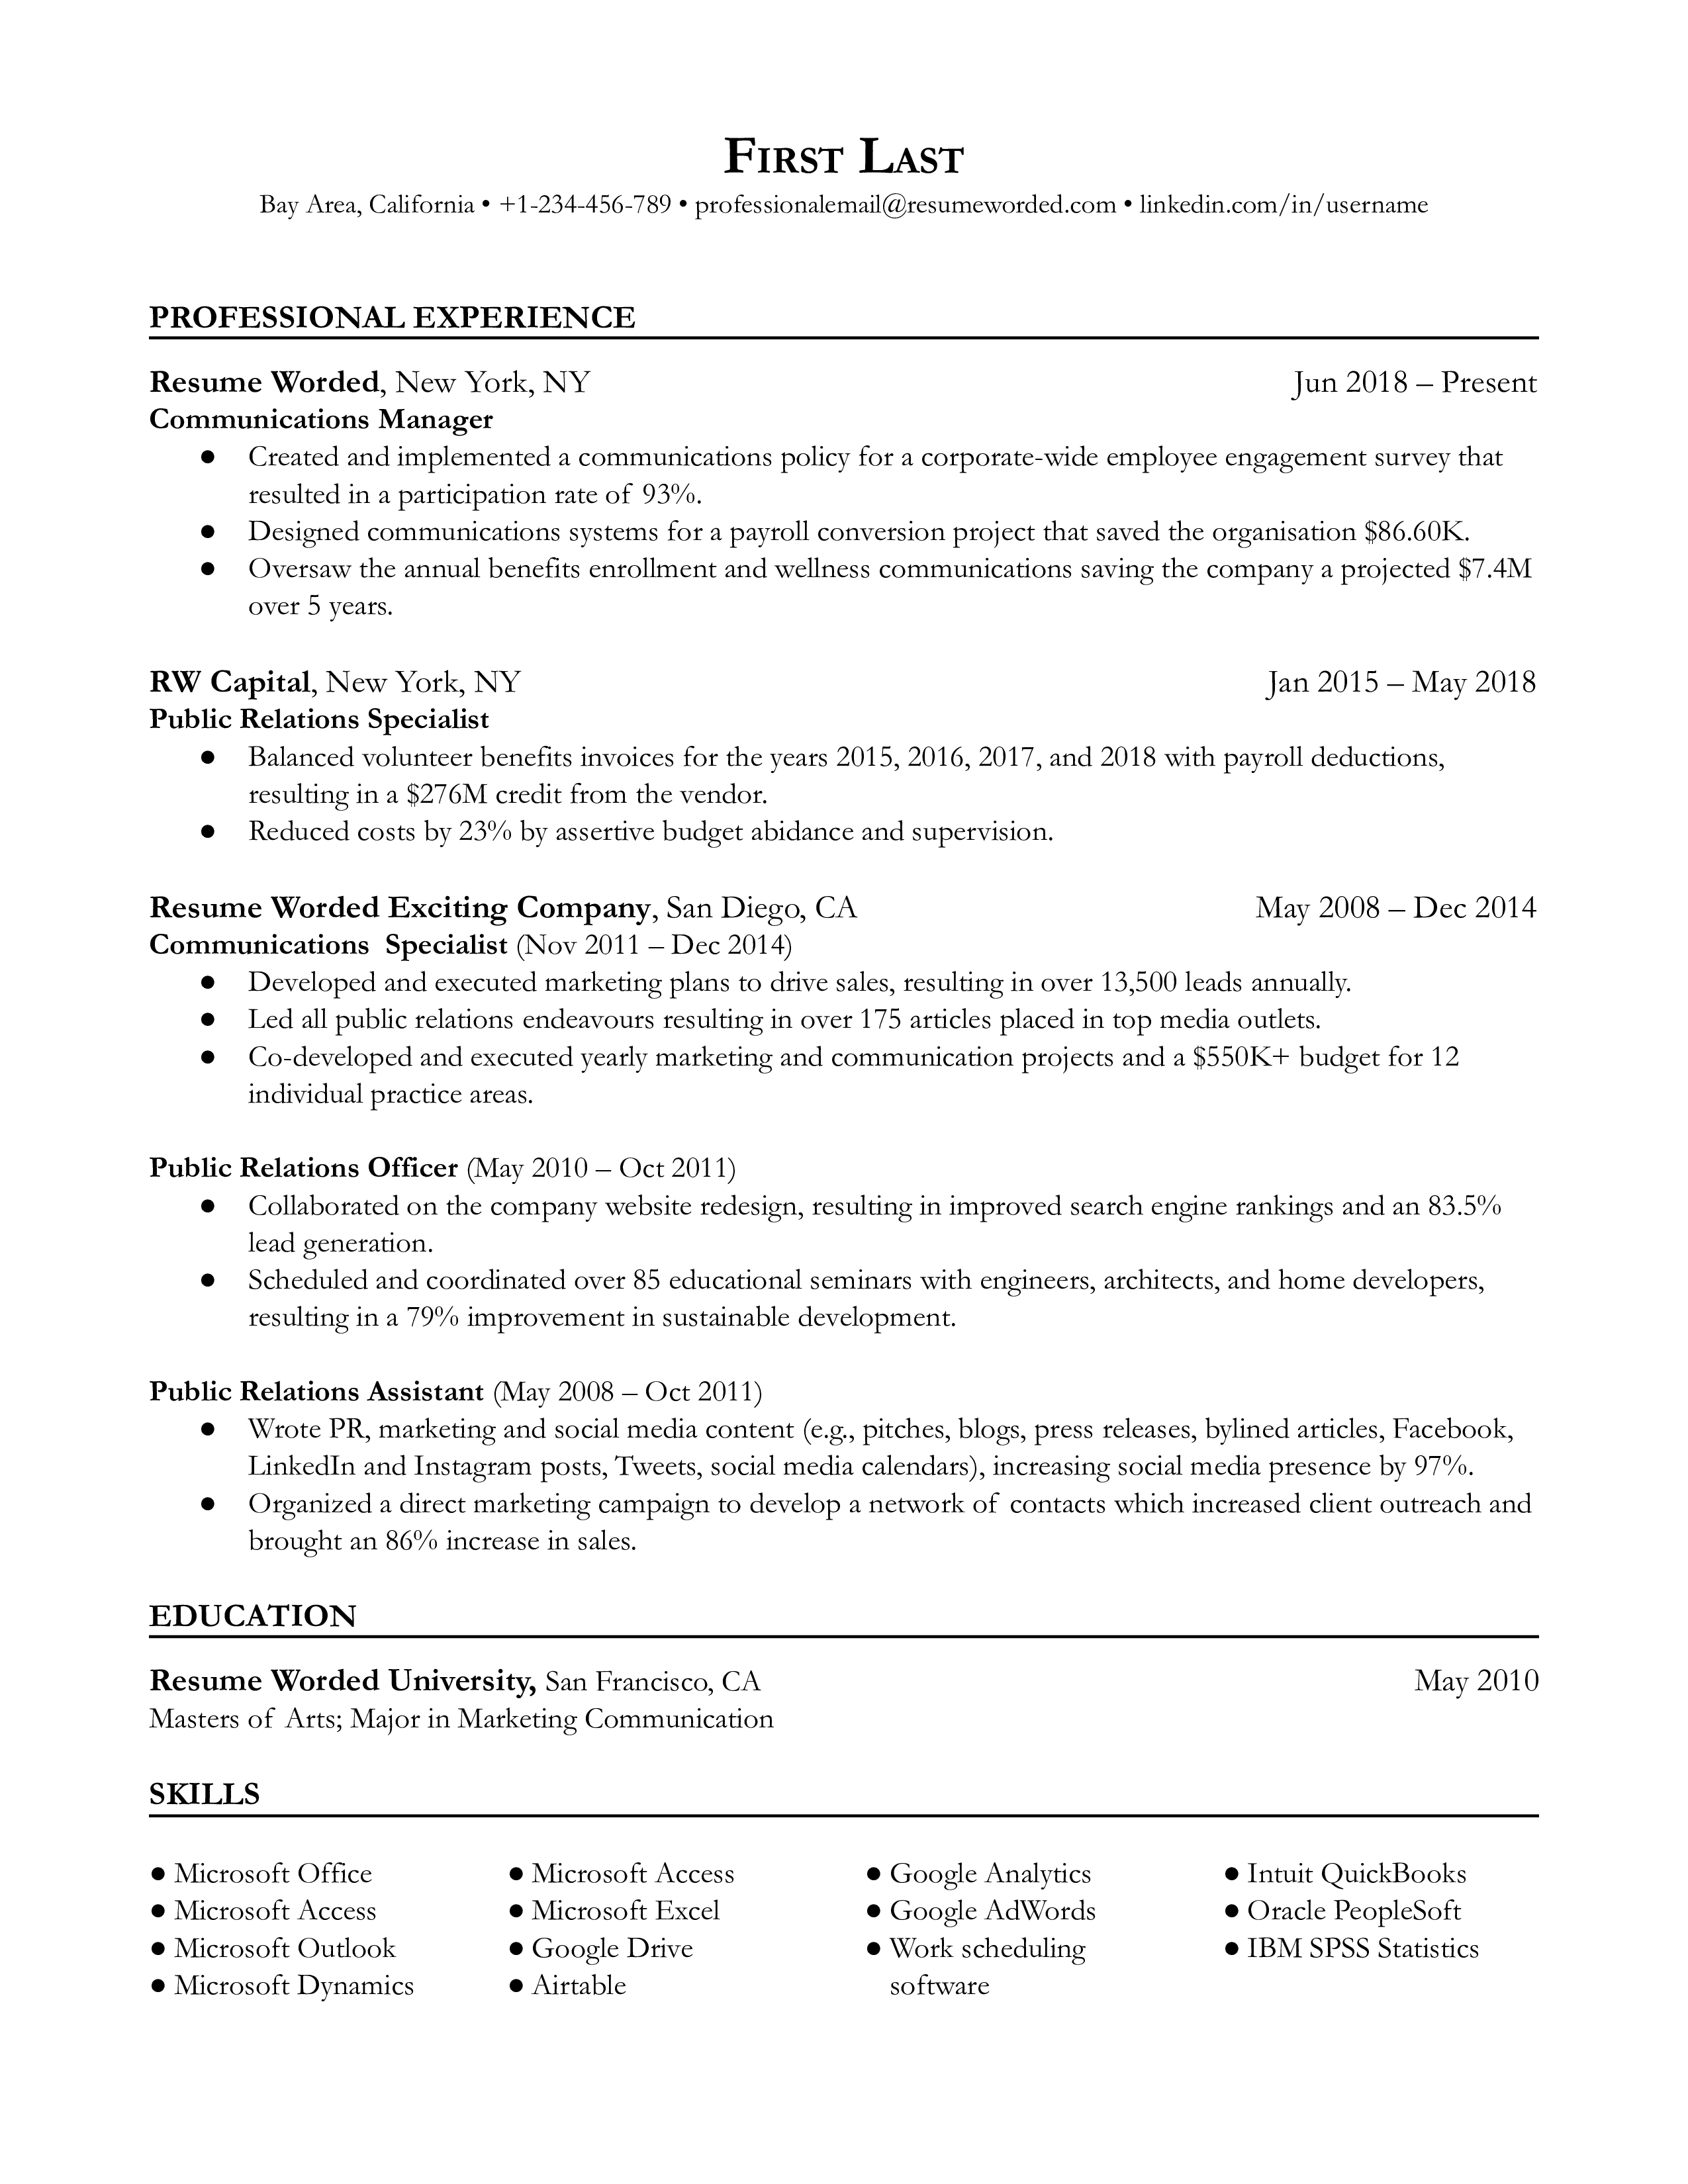 A detailed CV showcasing a Communications Manager's skills and experience.